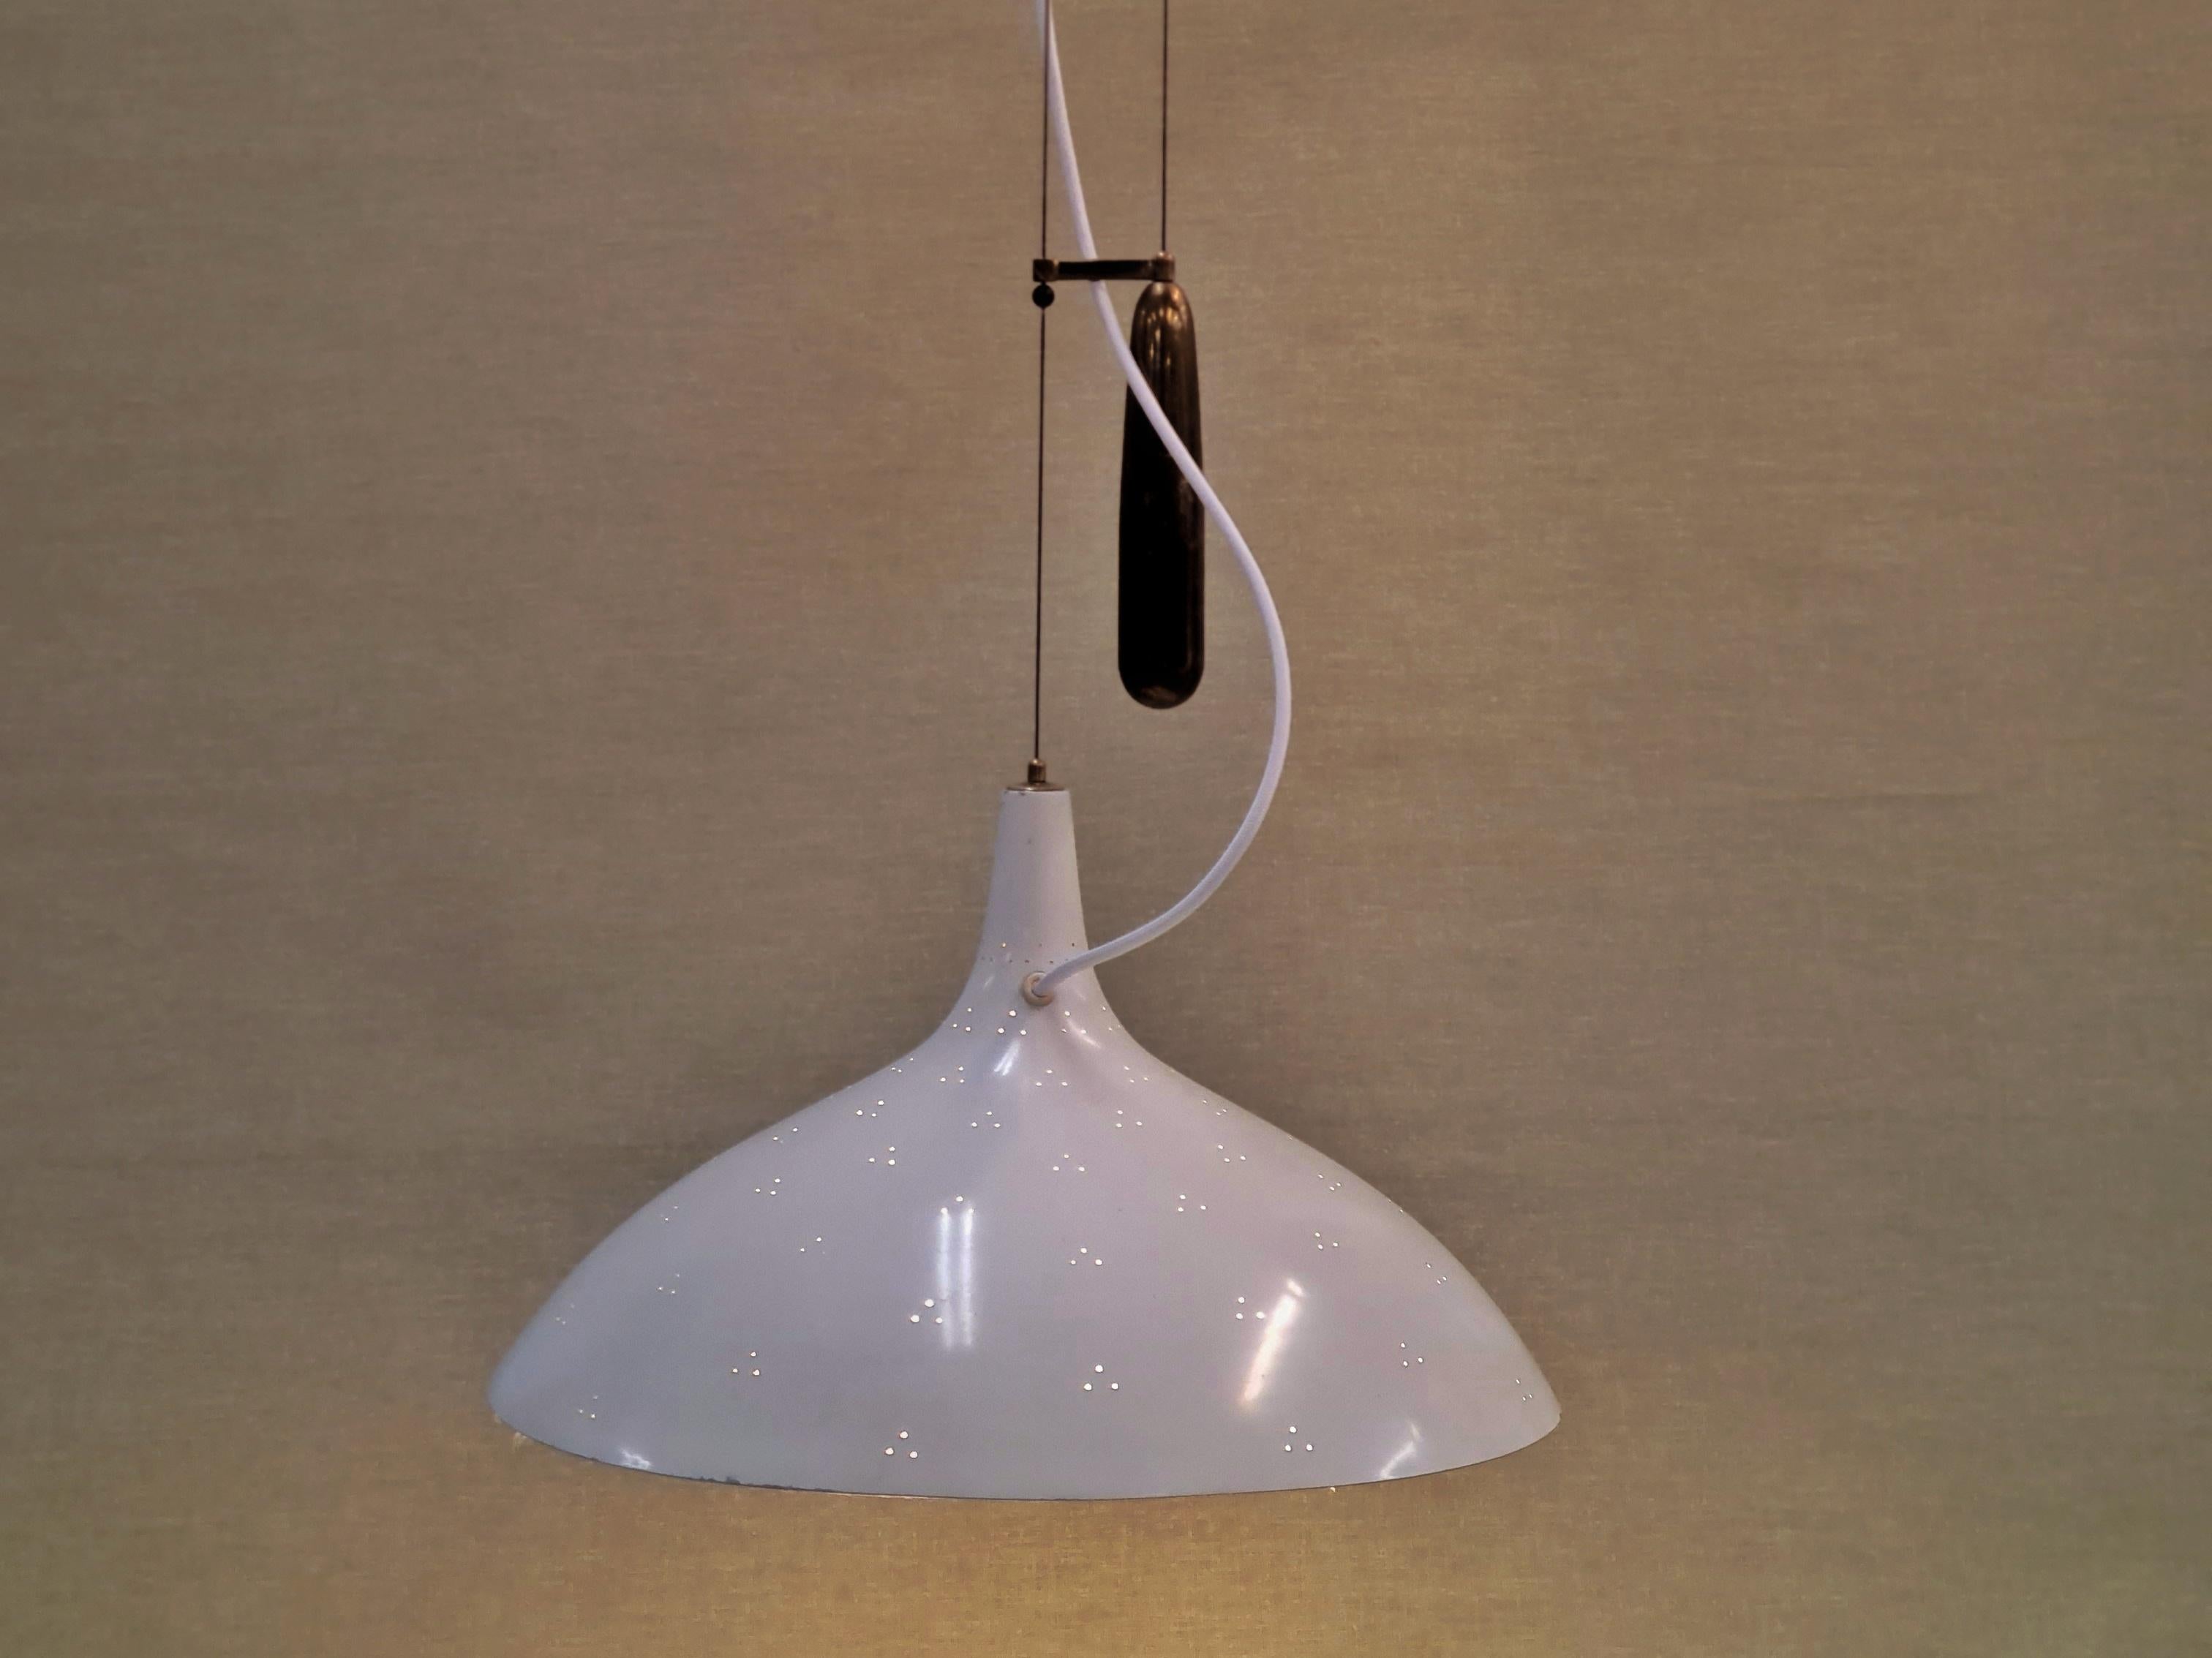 Paavo Tynell created the counter weight lamp design in response to American lamp specifications, that did not allow lamps to hang by electricity cords on their own. The result was a whole series of counter weight lamp designs of which this model,